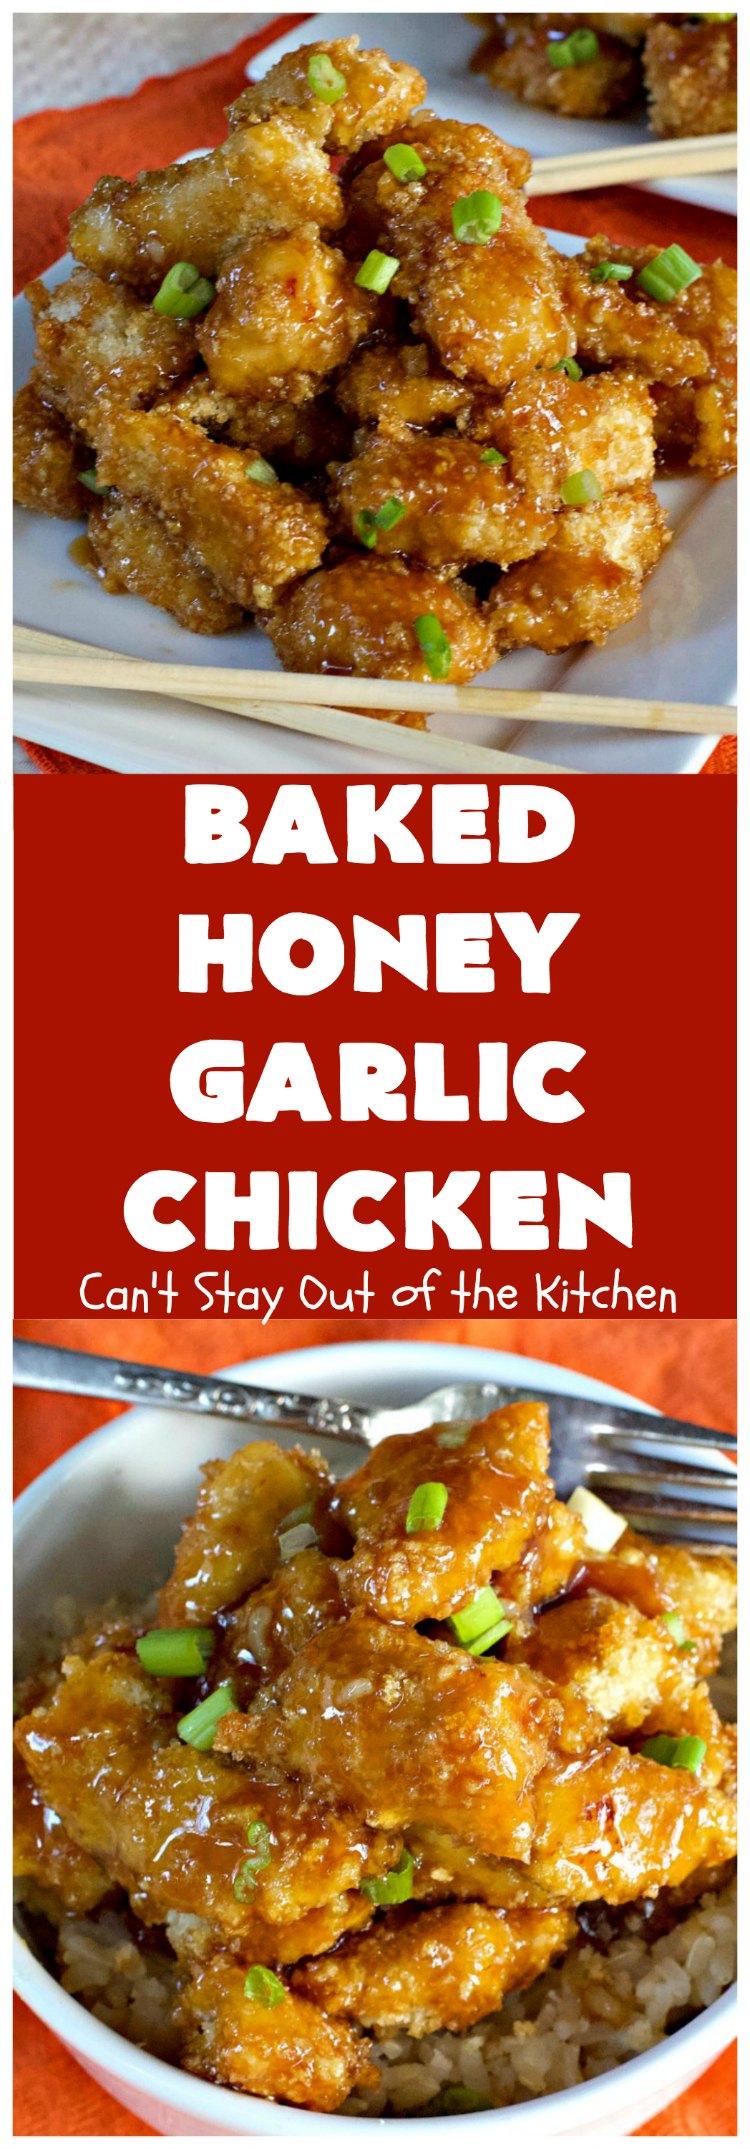 Baked Honey Garlic Chicken | Can't Stay Out of the Kitchen | this spicy #chicken #recipe is out of this world! The meat is breaded with #PankoBreadCrumbs and baked. The luscious sauce includes #honey, #Sriracha & soy sauce. The combination of flavors is dynamite. Makes a delicious weeknight dinner. I love how easy it is to make. #Asian #SesameSeeds #BakedHoneyGarlicChicken